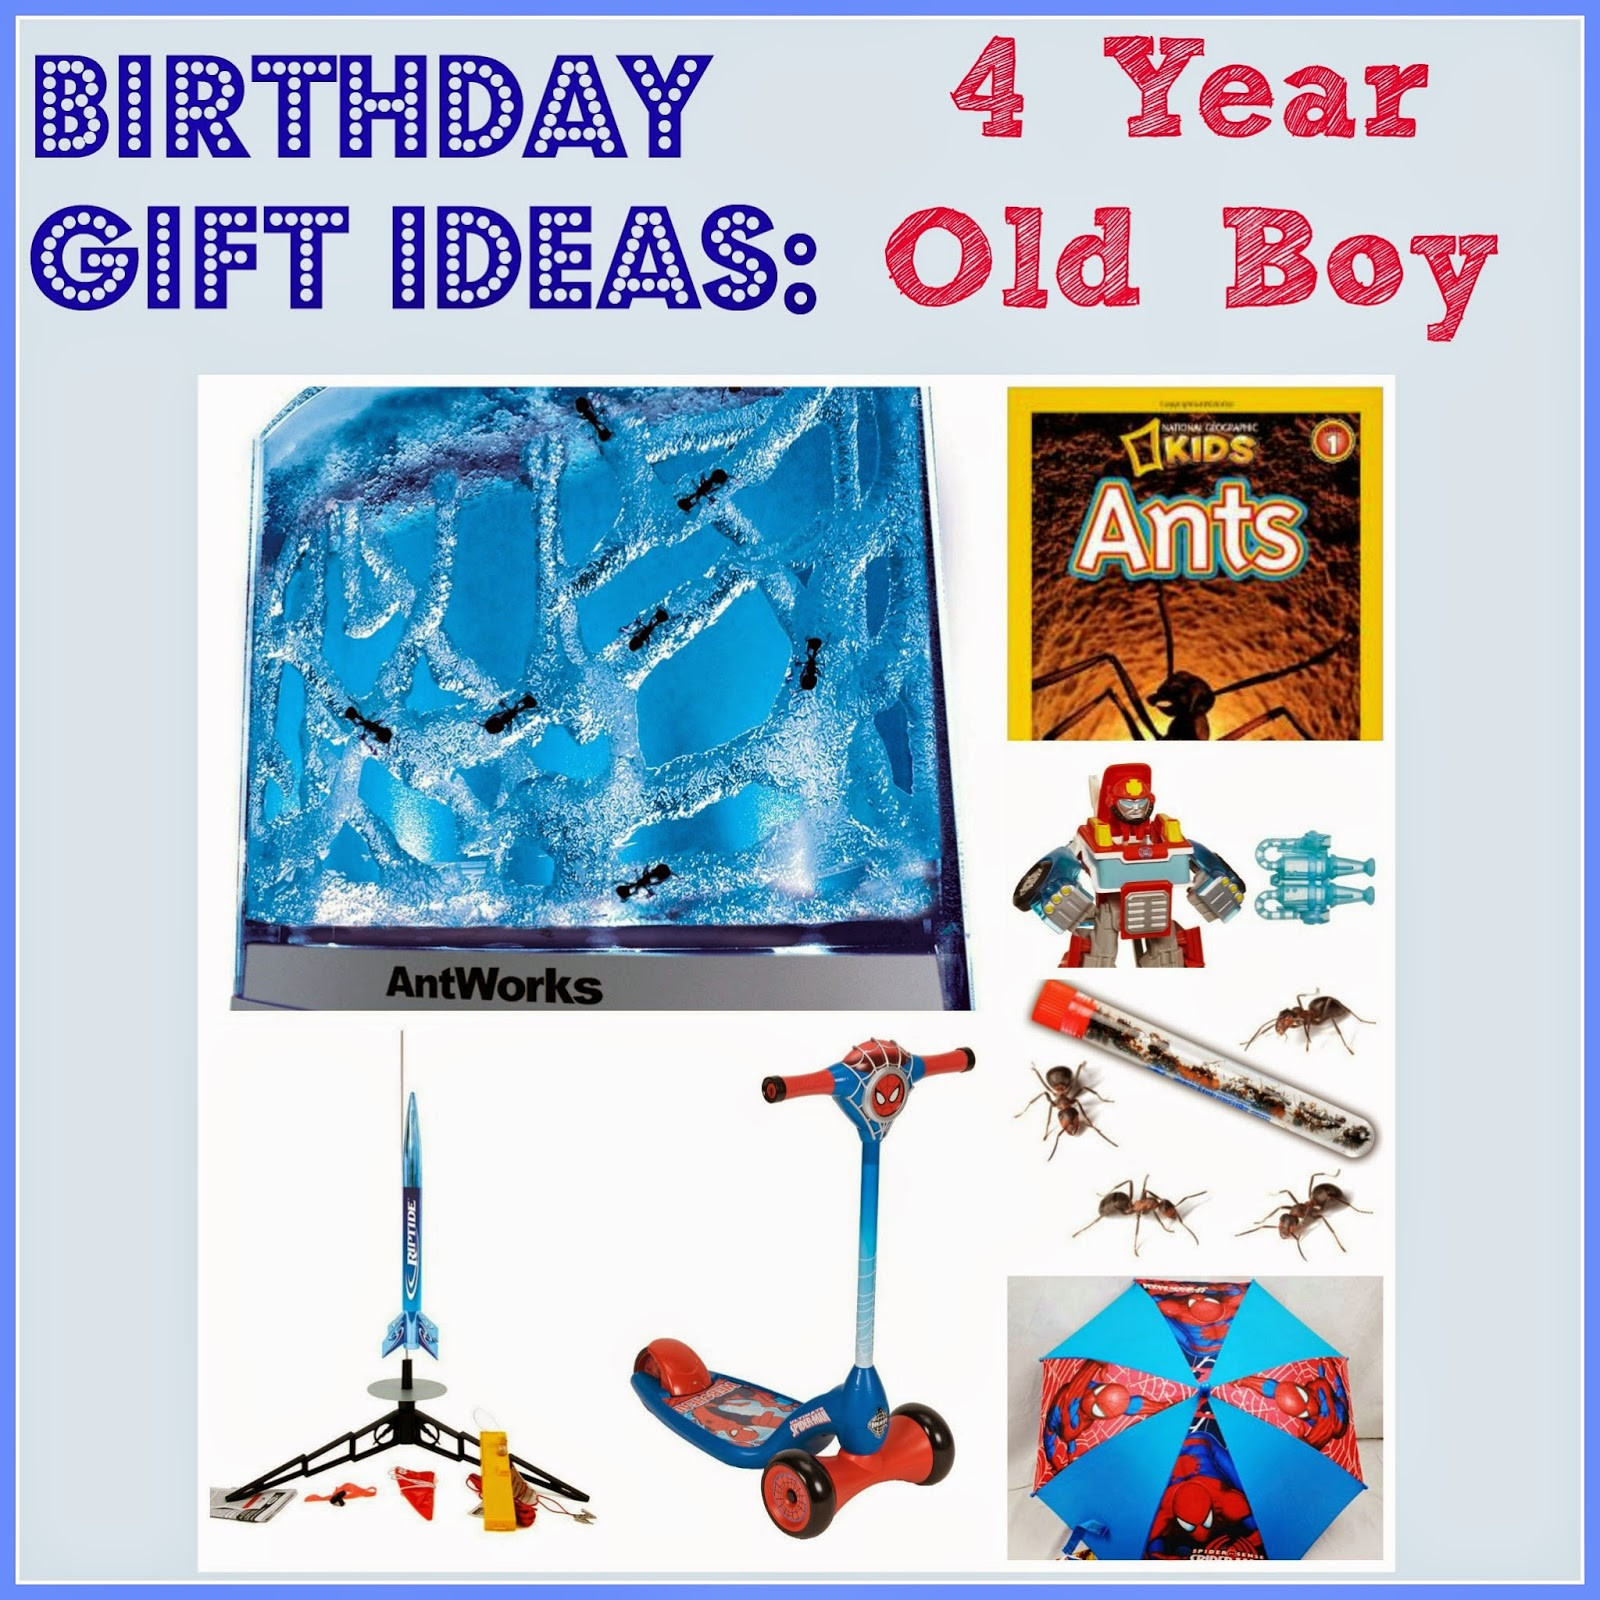 Birthday Gifts For 4 Year Old Boy
 Jude is Turning 4 Birthday Ideas Judeturns4 Building